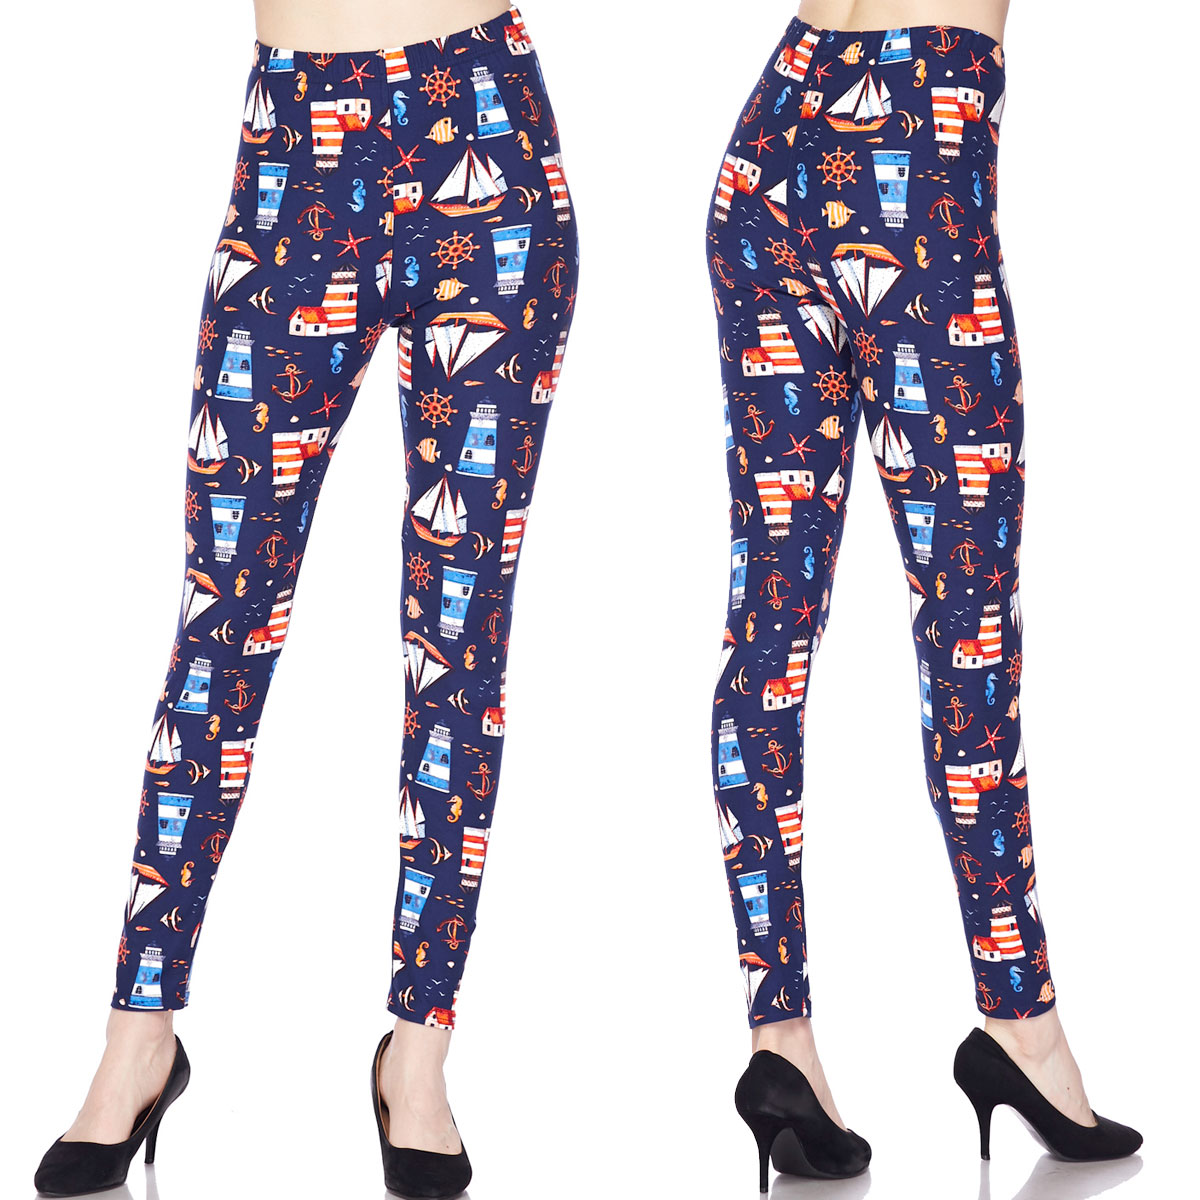 L006P Lighthouse and Anchors Brushed Fiber Leggings - Ankle Length Print 